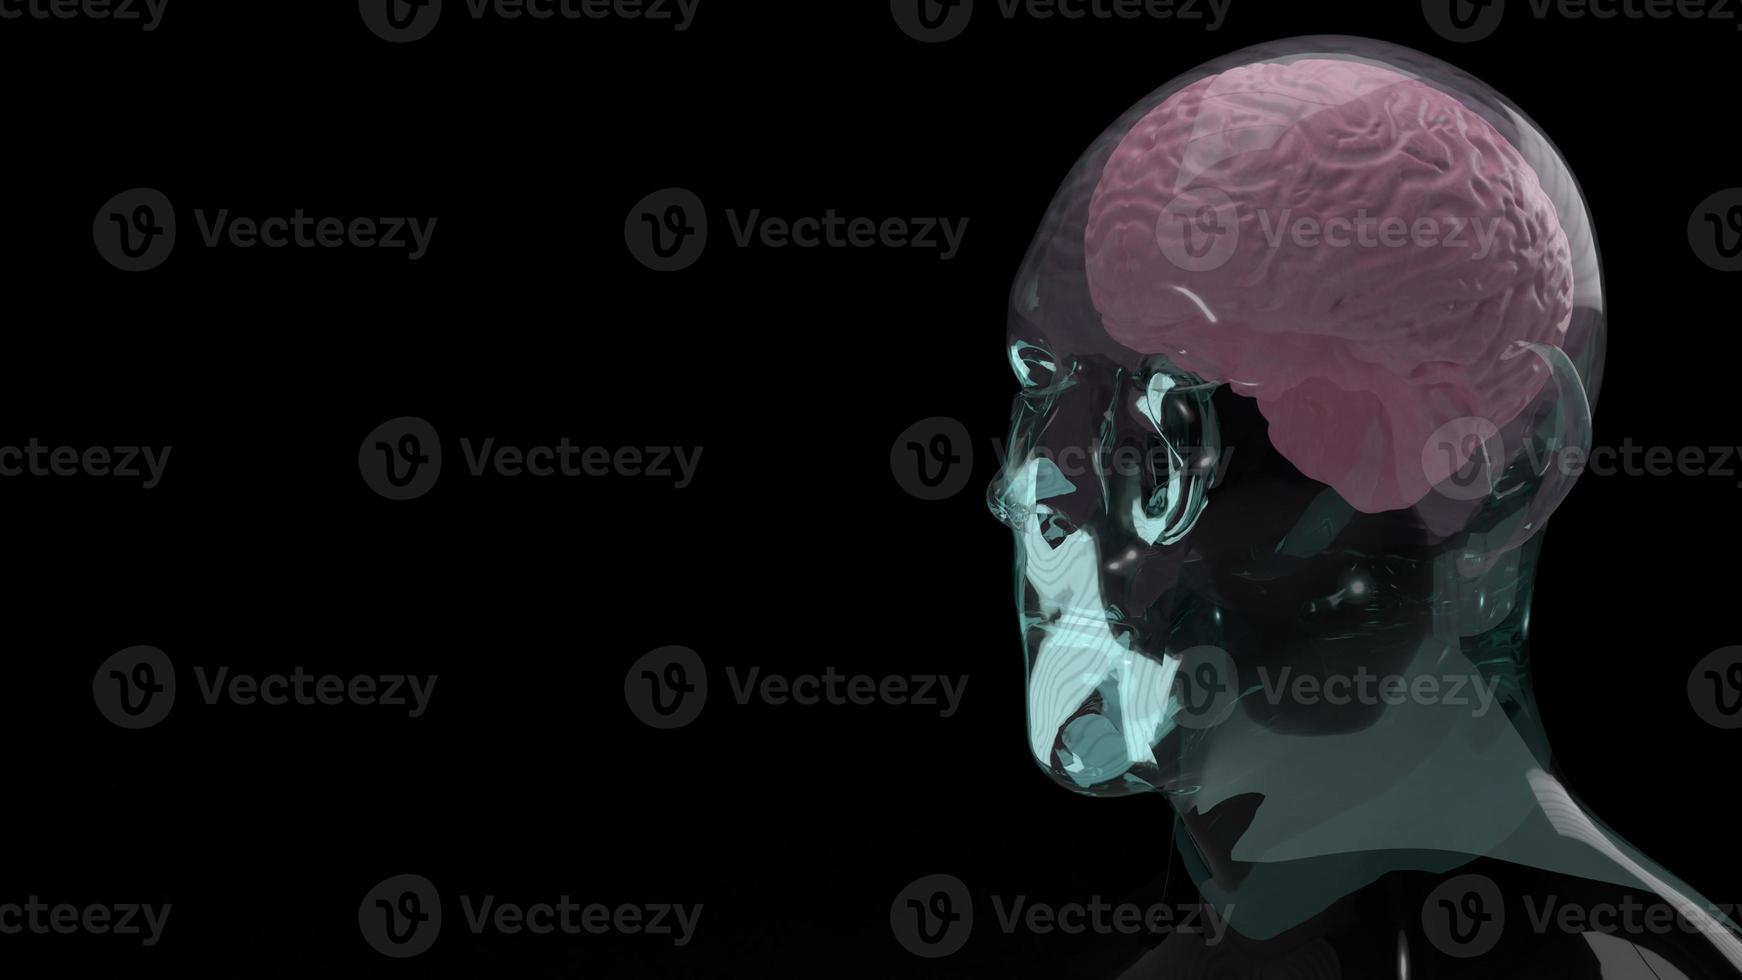 The brain inside crystal head for education or sci content 3d rendering photo